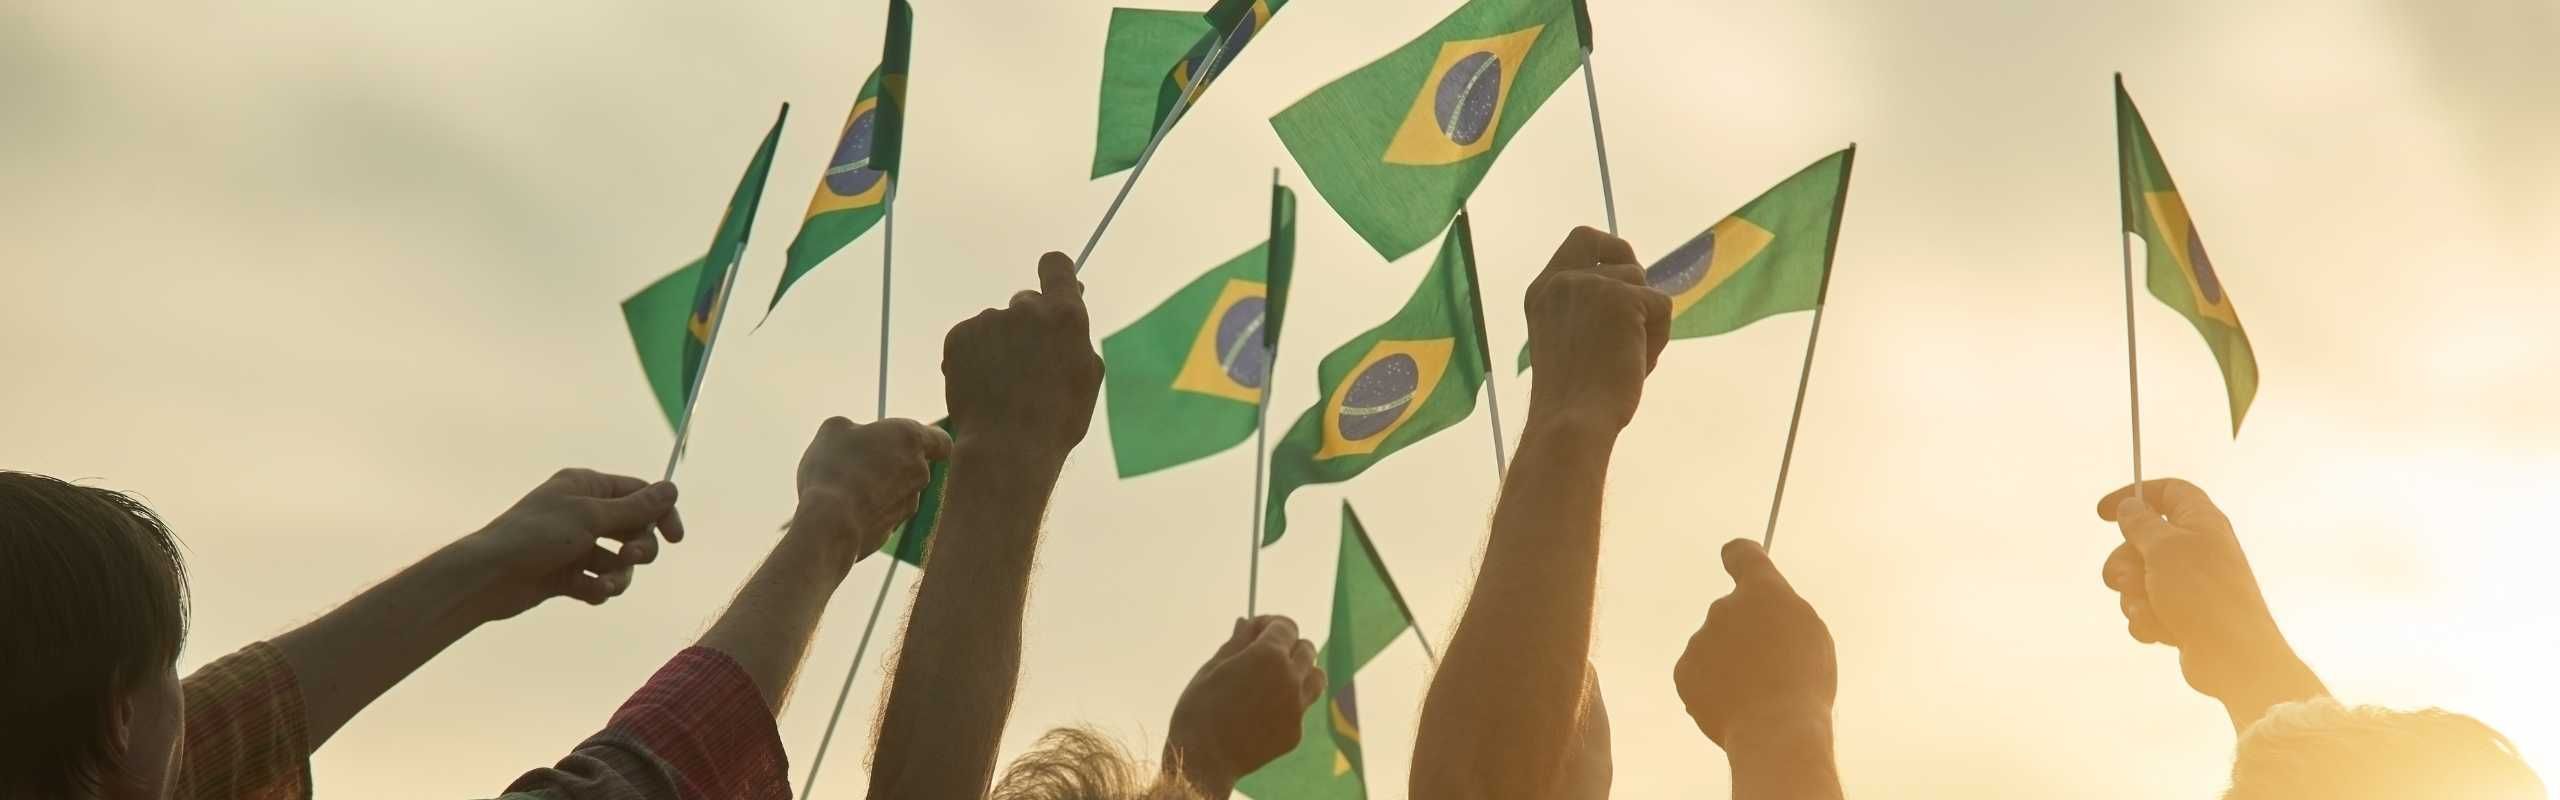 Hands holding Brazilian flags in the air